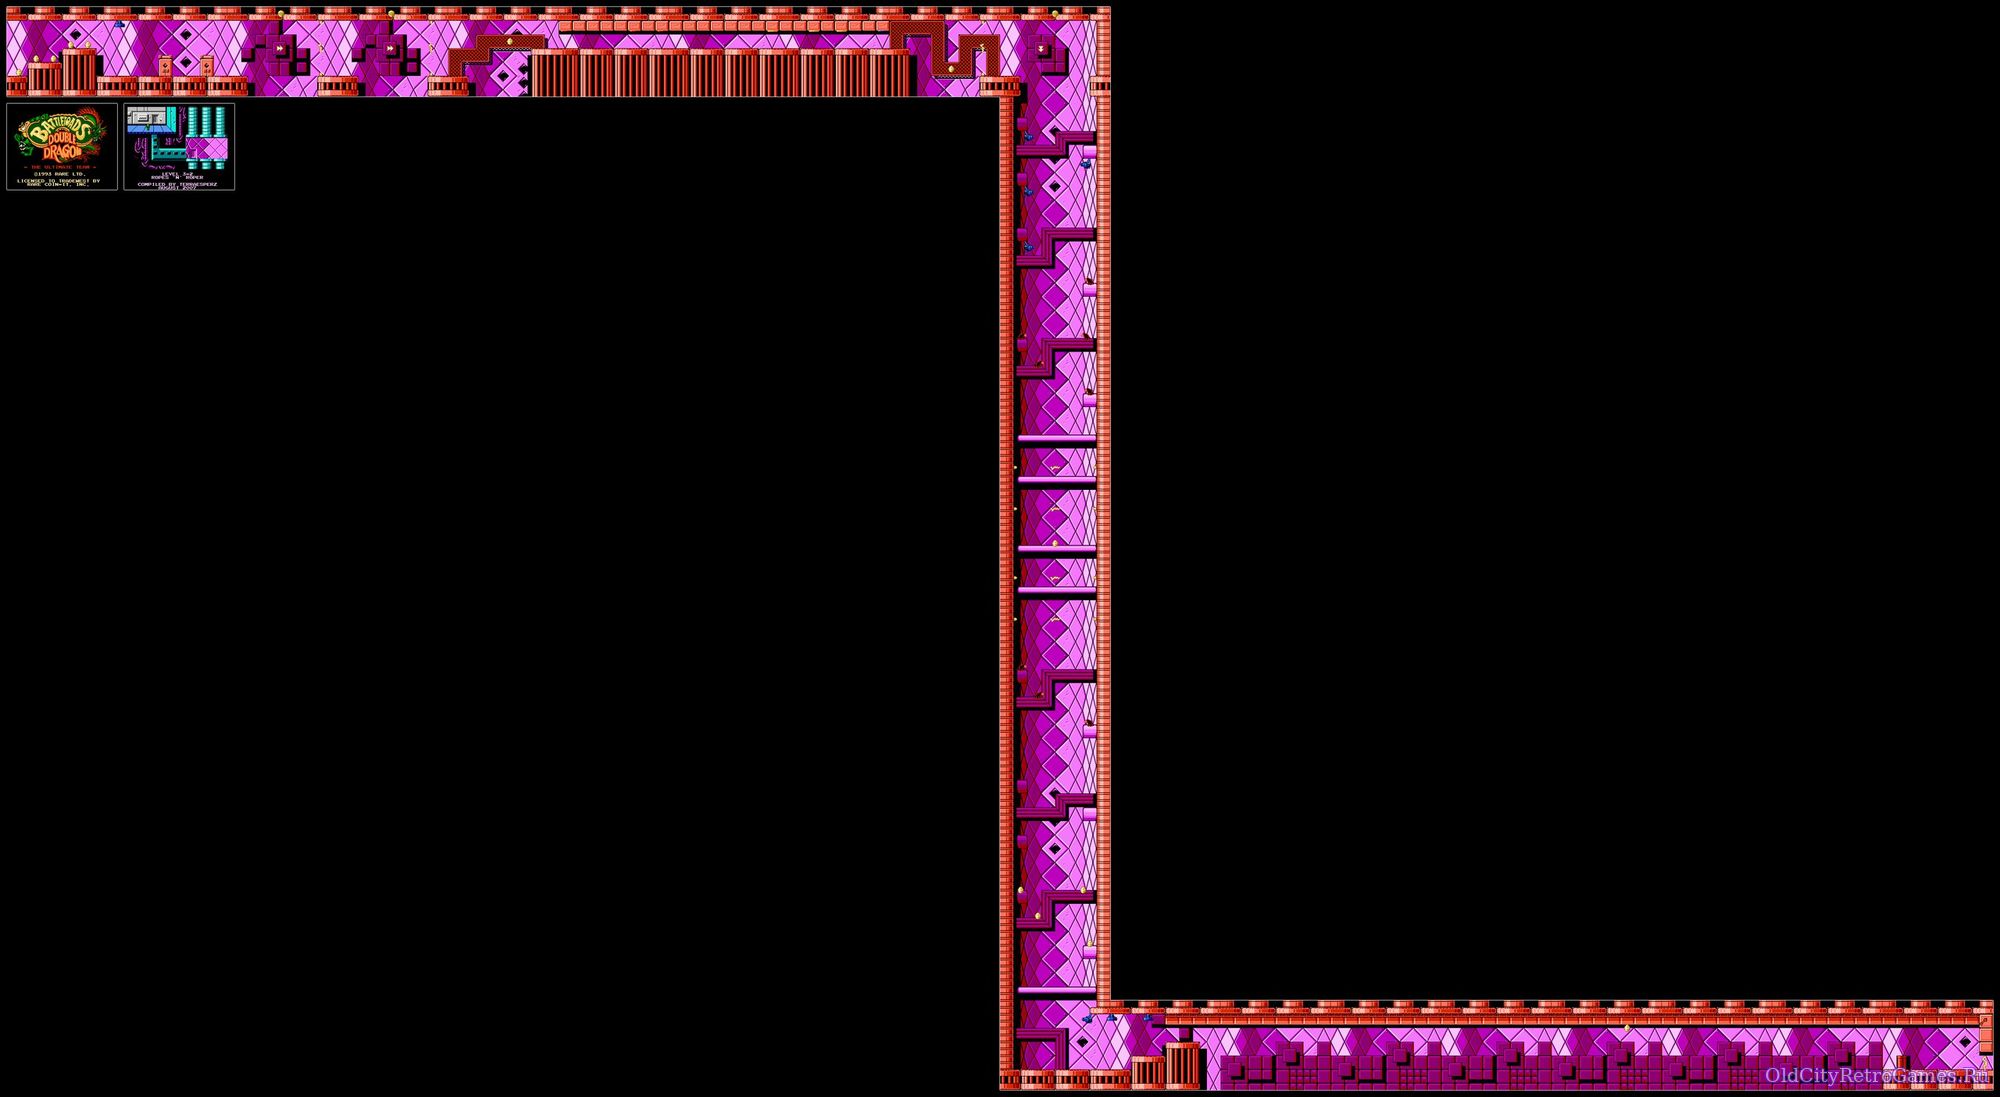 Battletoads and Double Dragon, Map #5